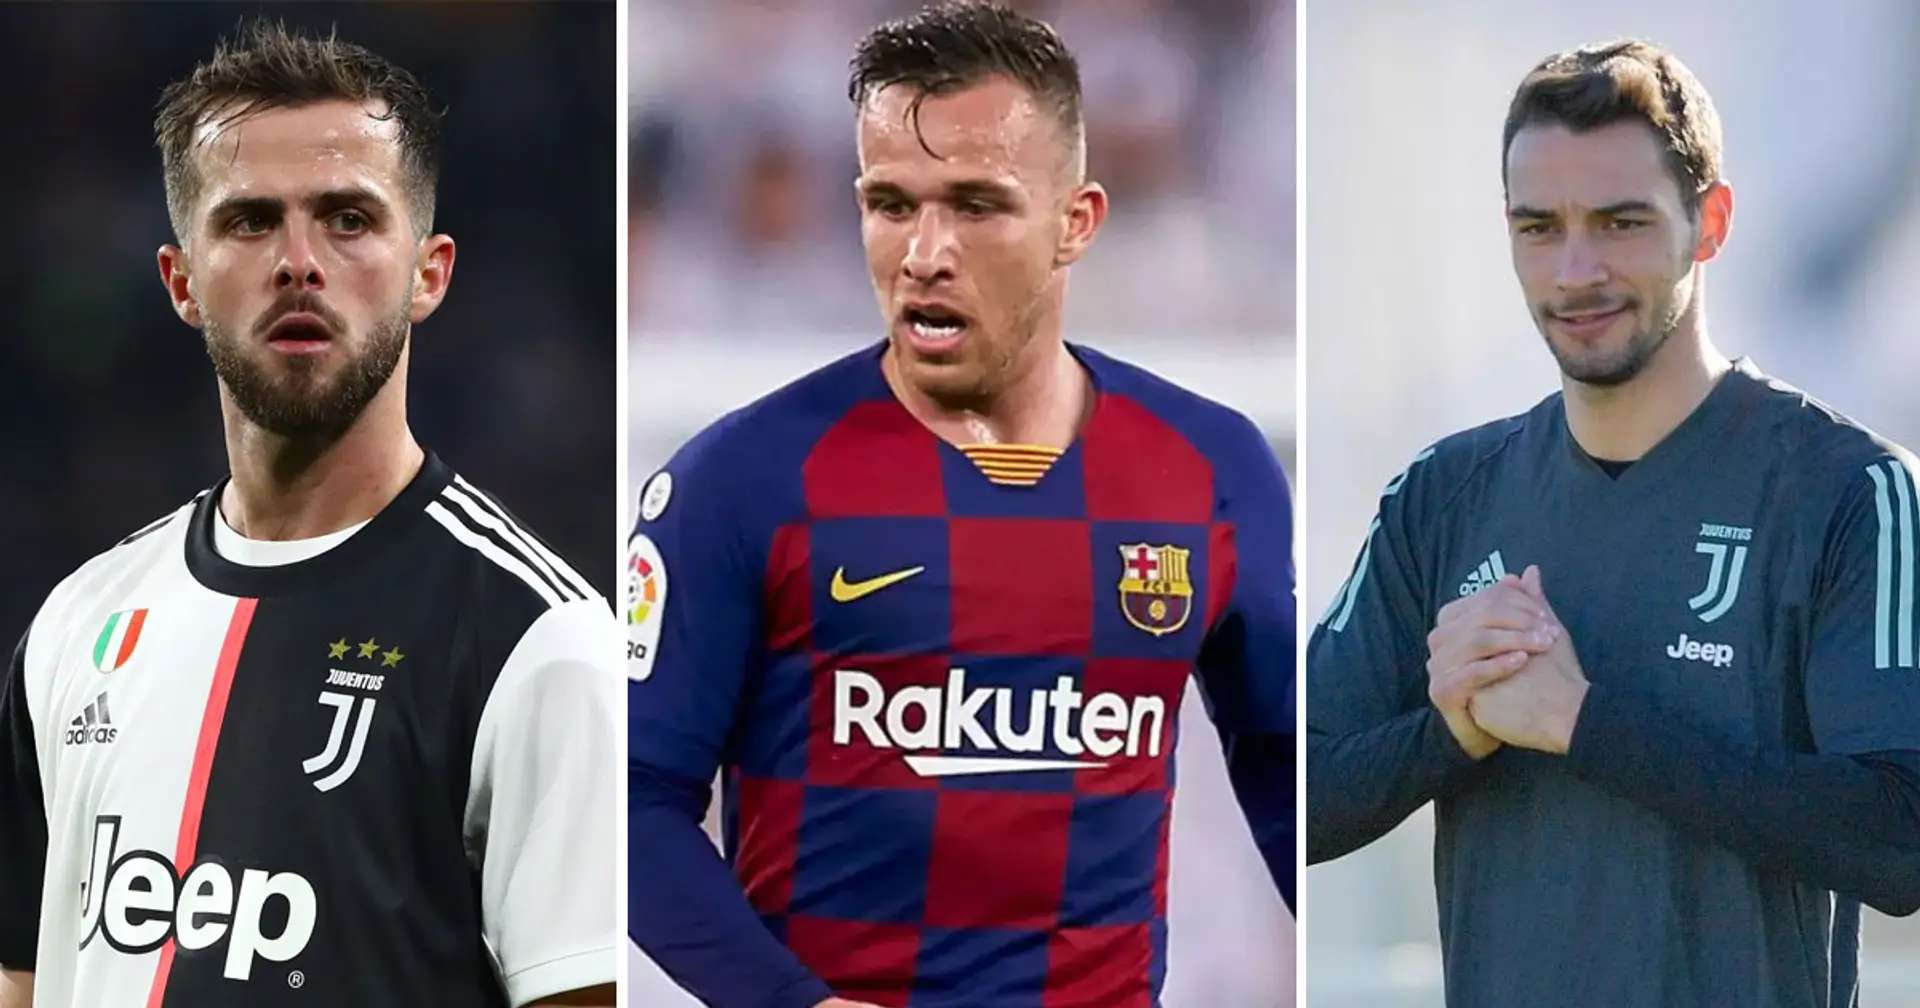 Barca-Juventus talks reportedly ongoing: Arthur, Pjanic and De Sciglio names mentioned